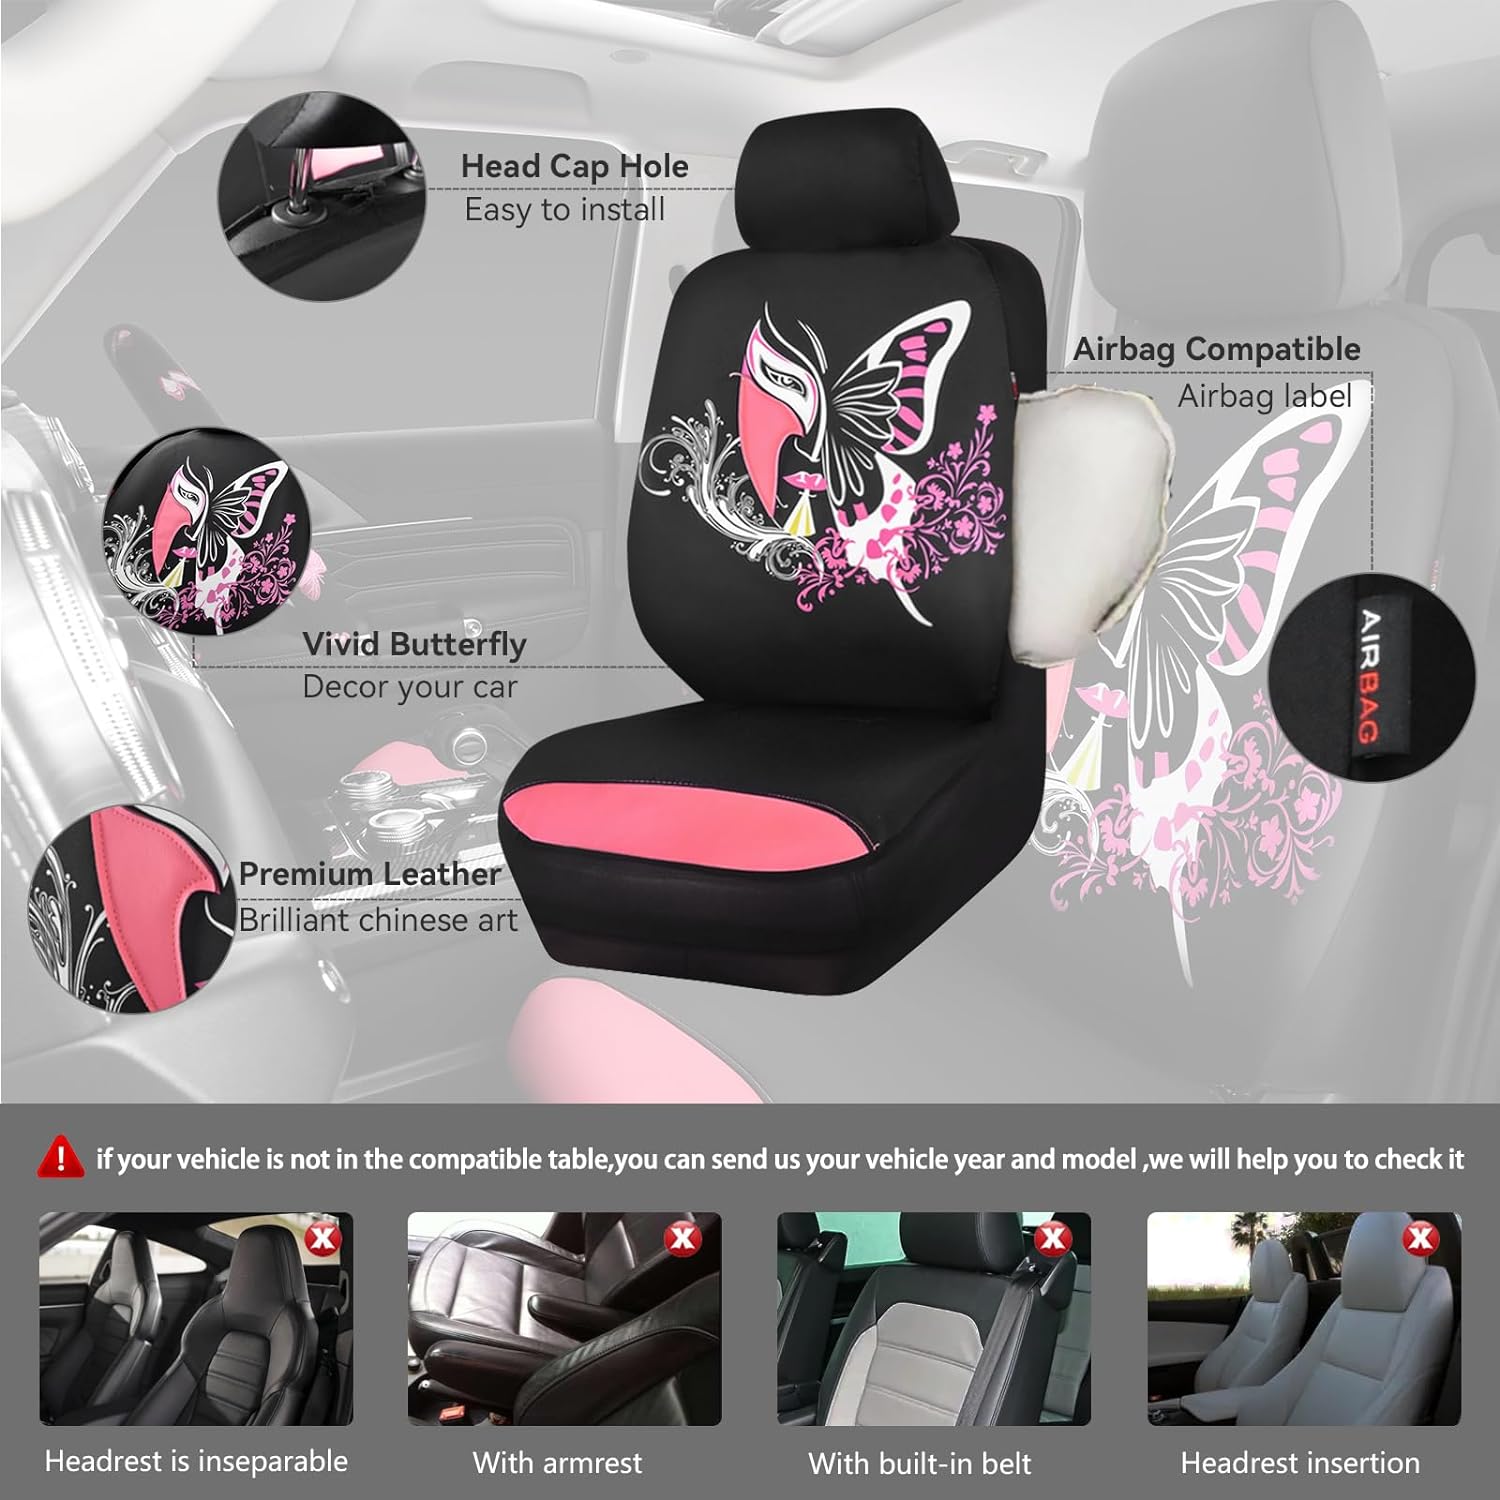 Car Pass Pink Embroidery Butterfly Steering Wheel Cover, Universal 15 Inch Car Wheel Cover for Women Girls, Fit for Suvs,Trucks,Sedans,Cars (Black and Pink)